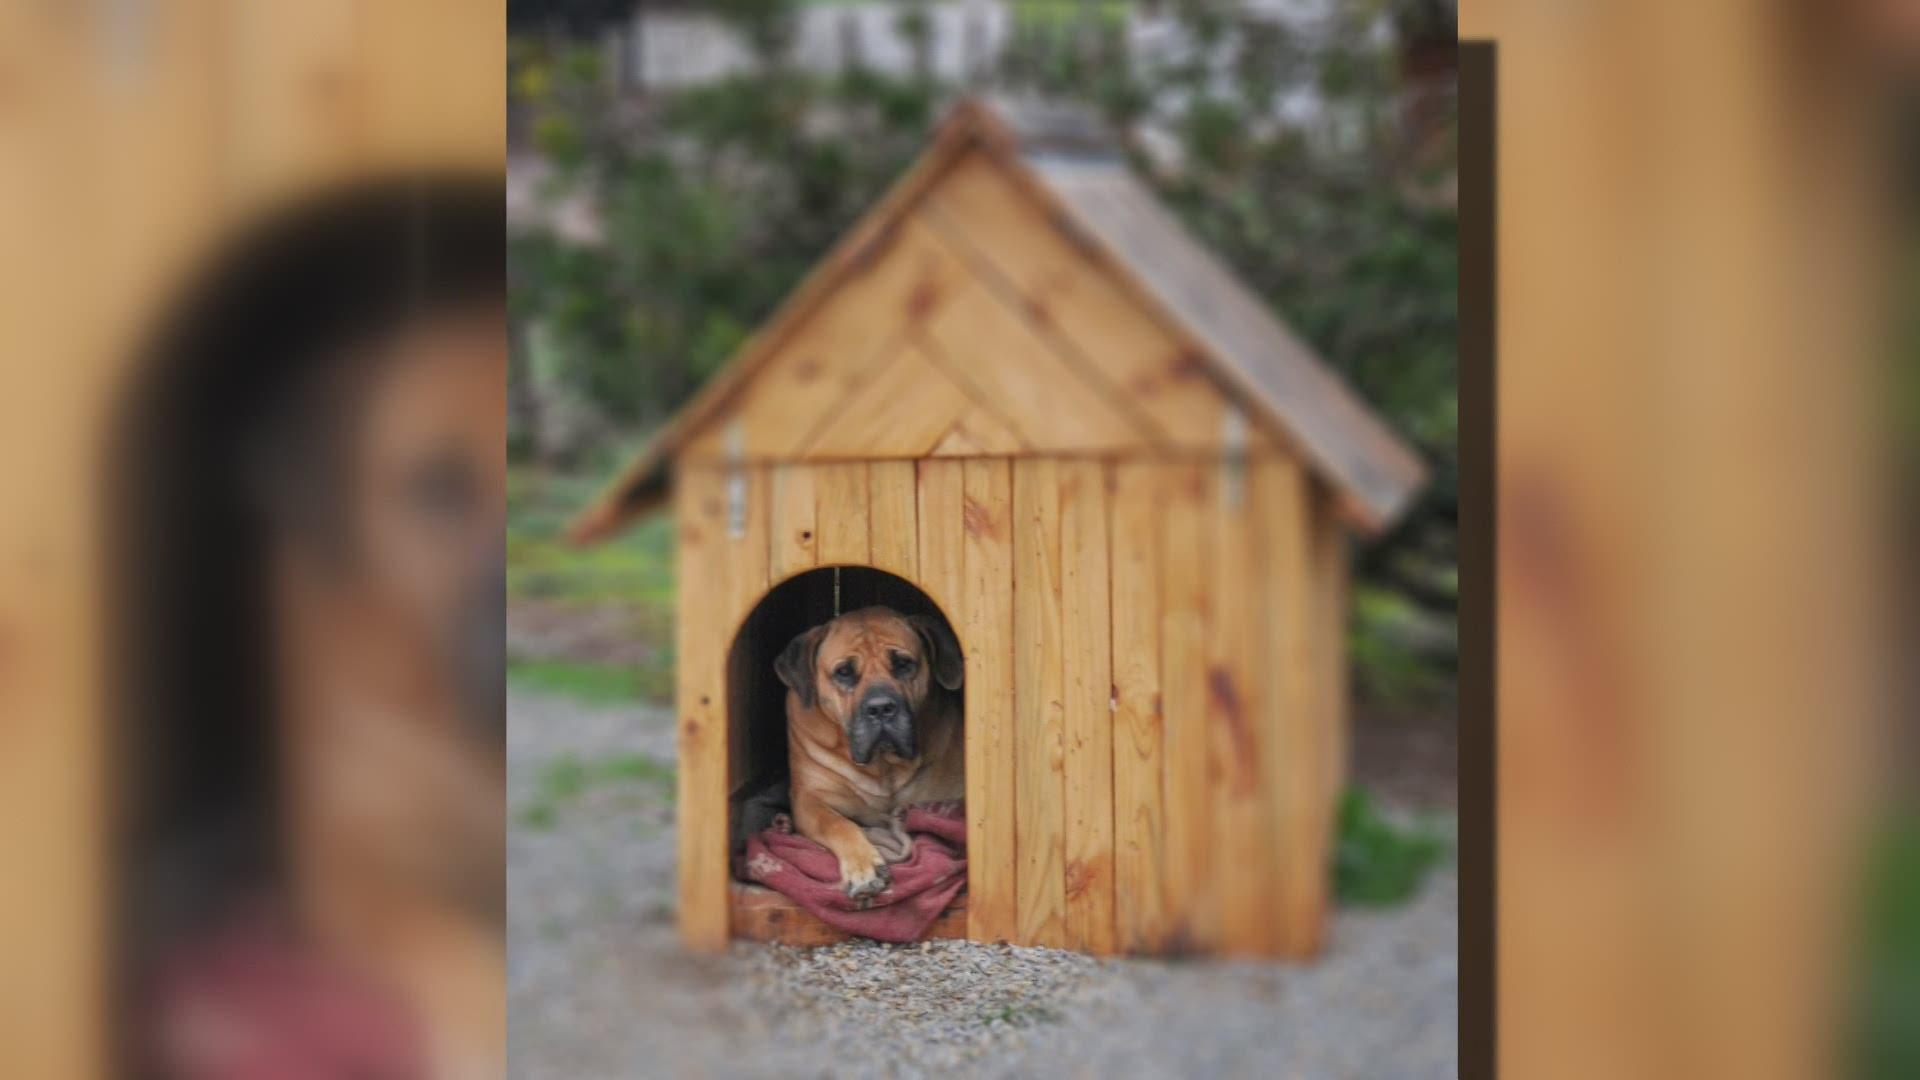 An abandoned car or space beneath a deck is not adequate shelter for dogs during weather extremes; a state representative wants to make that clear with his bill.